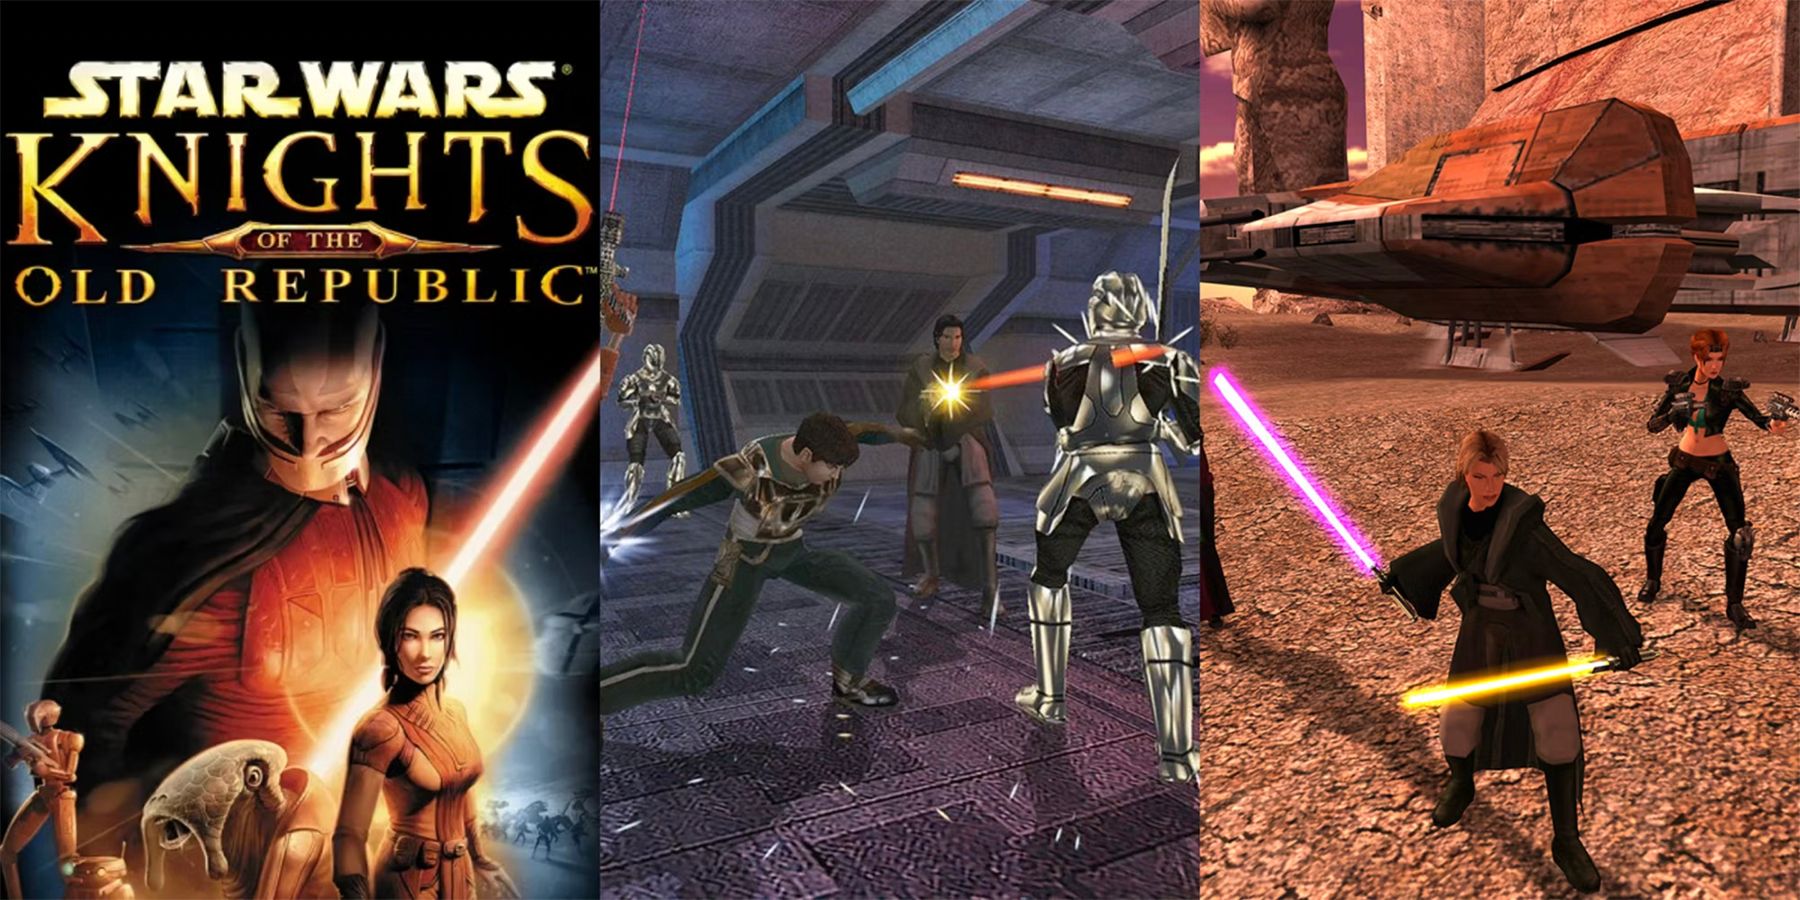 Star wars the knight of the old republic русификатор steam фото 43